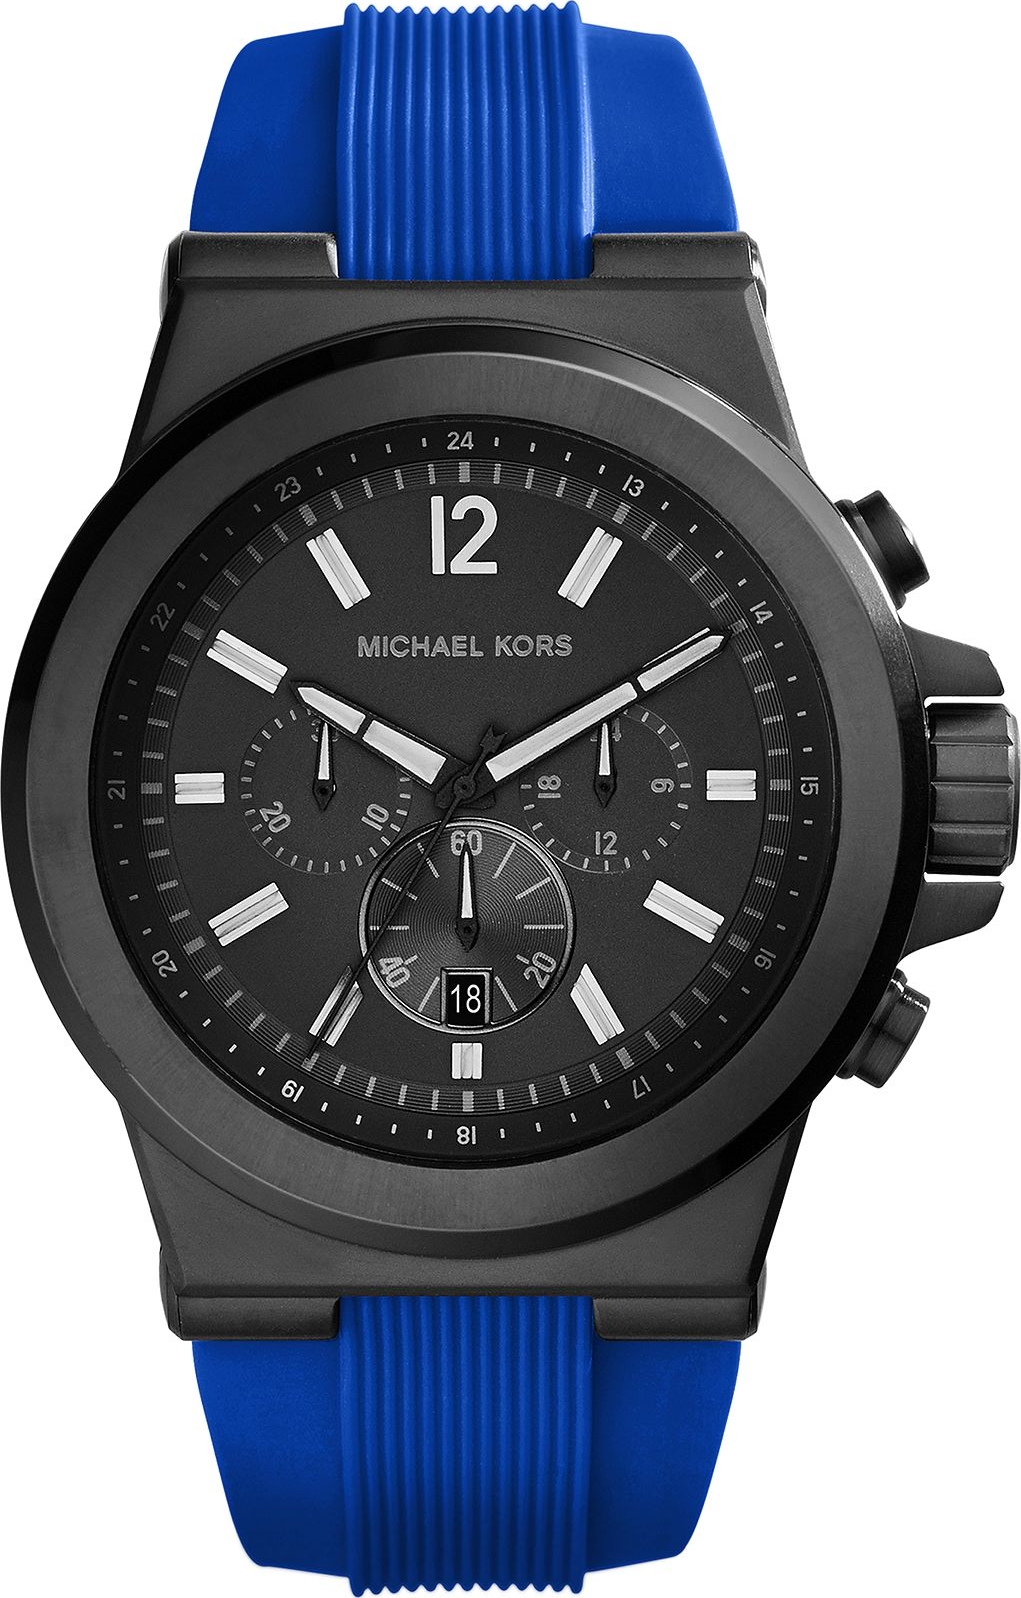 Michael kors dylan stainless steel chronograph watch